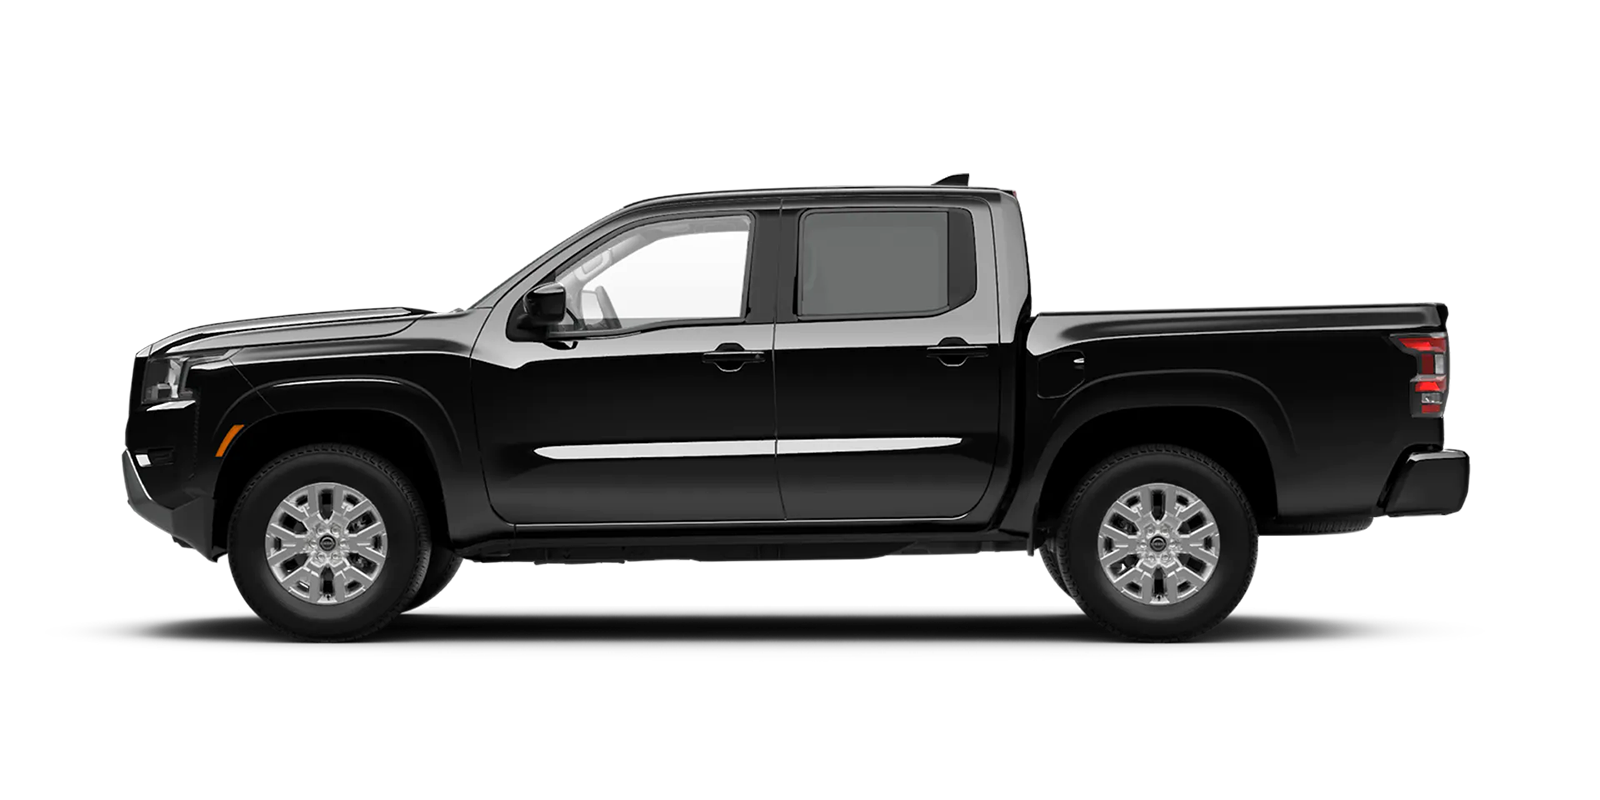 2022 Frontier Crew Cab SV 4x2 in Super Black | Fort Collins Nissan in Fort Collins CO